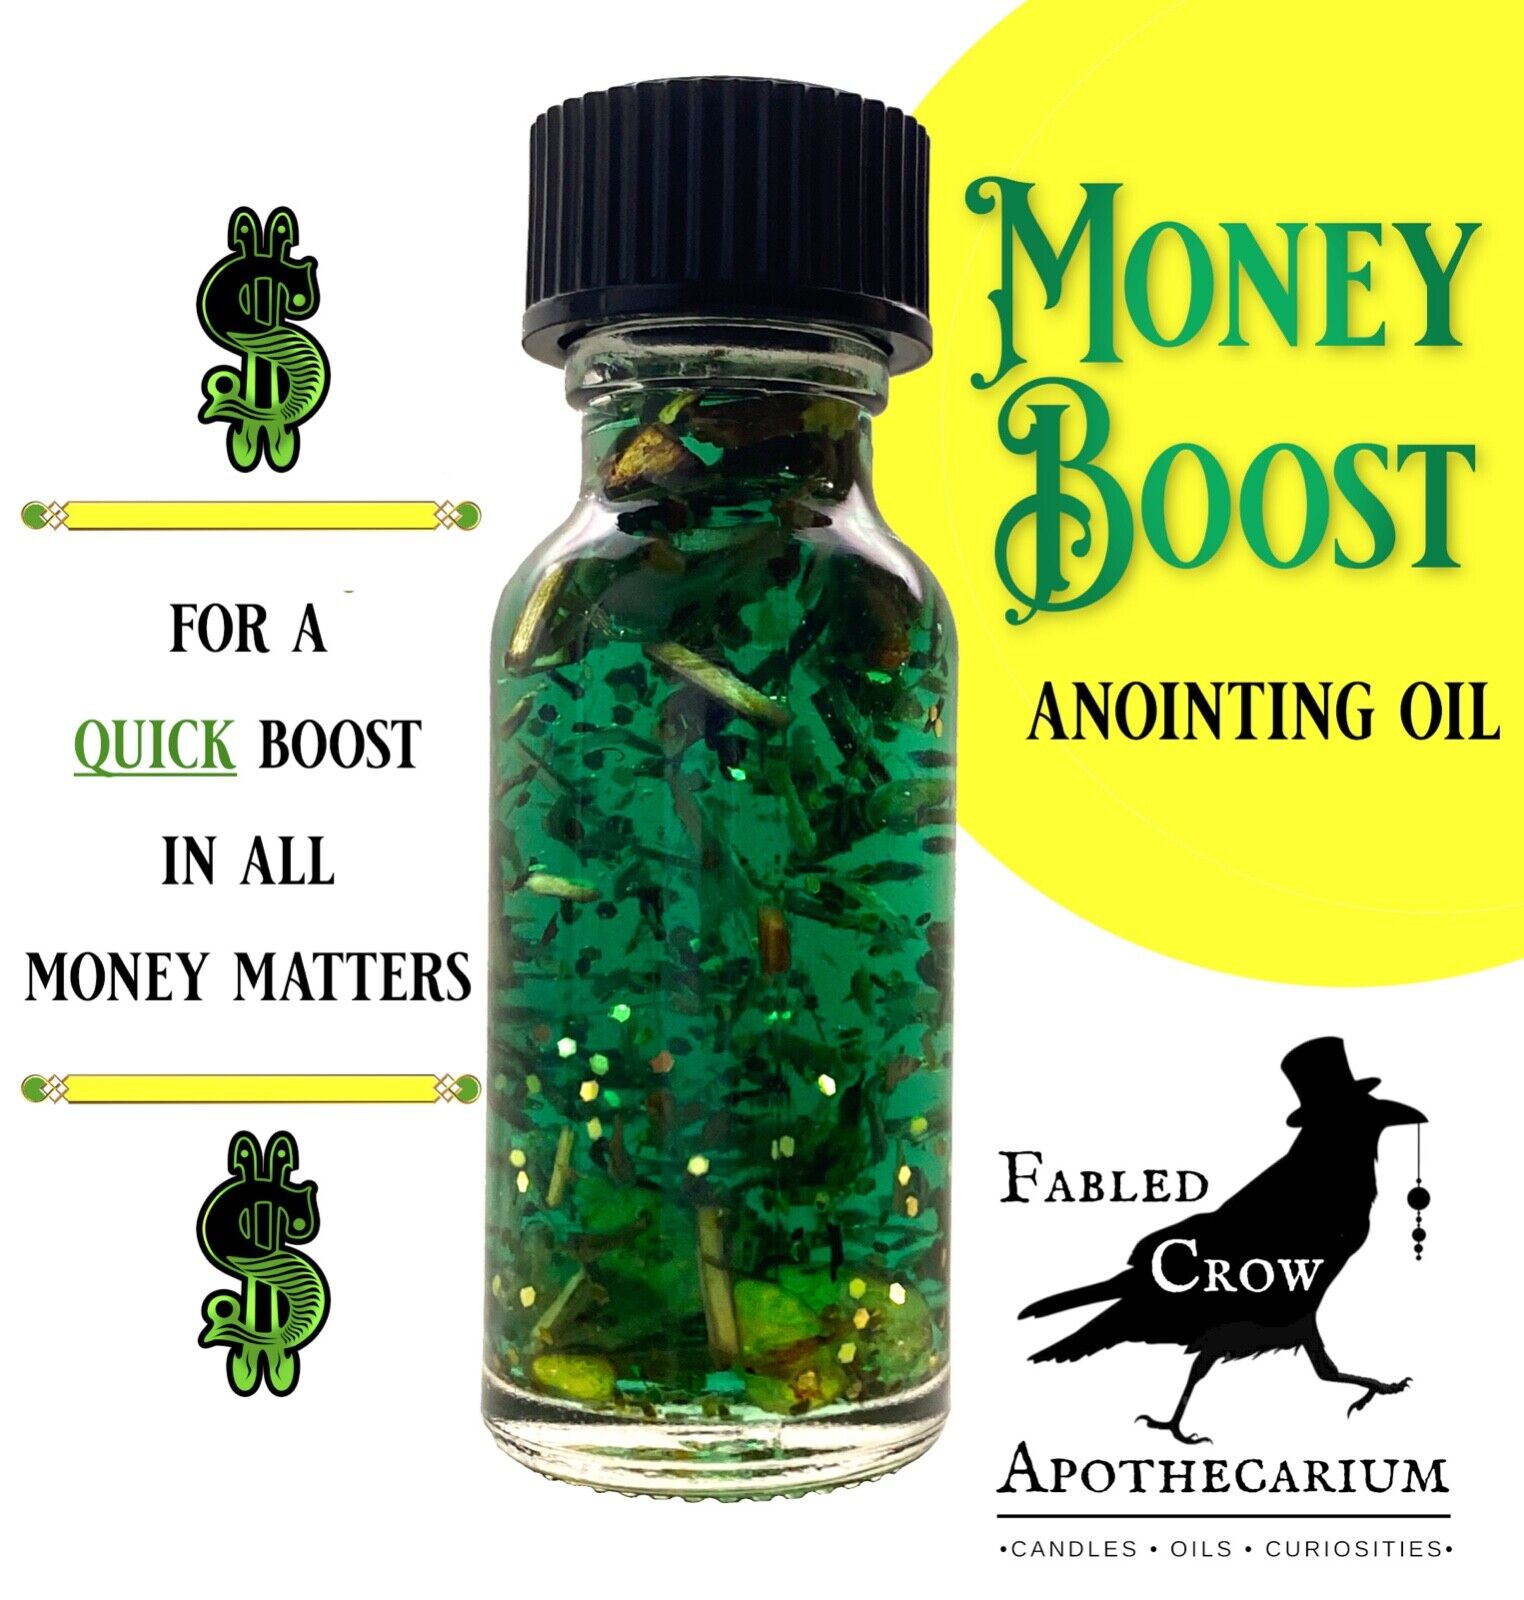 MONEY BOOST Oil Witchcraft Finance Hoodoo Occult Magick Metaphysical FABLED CROW